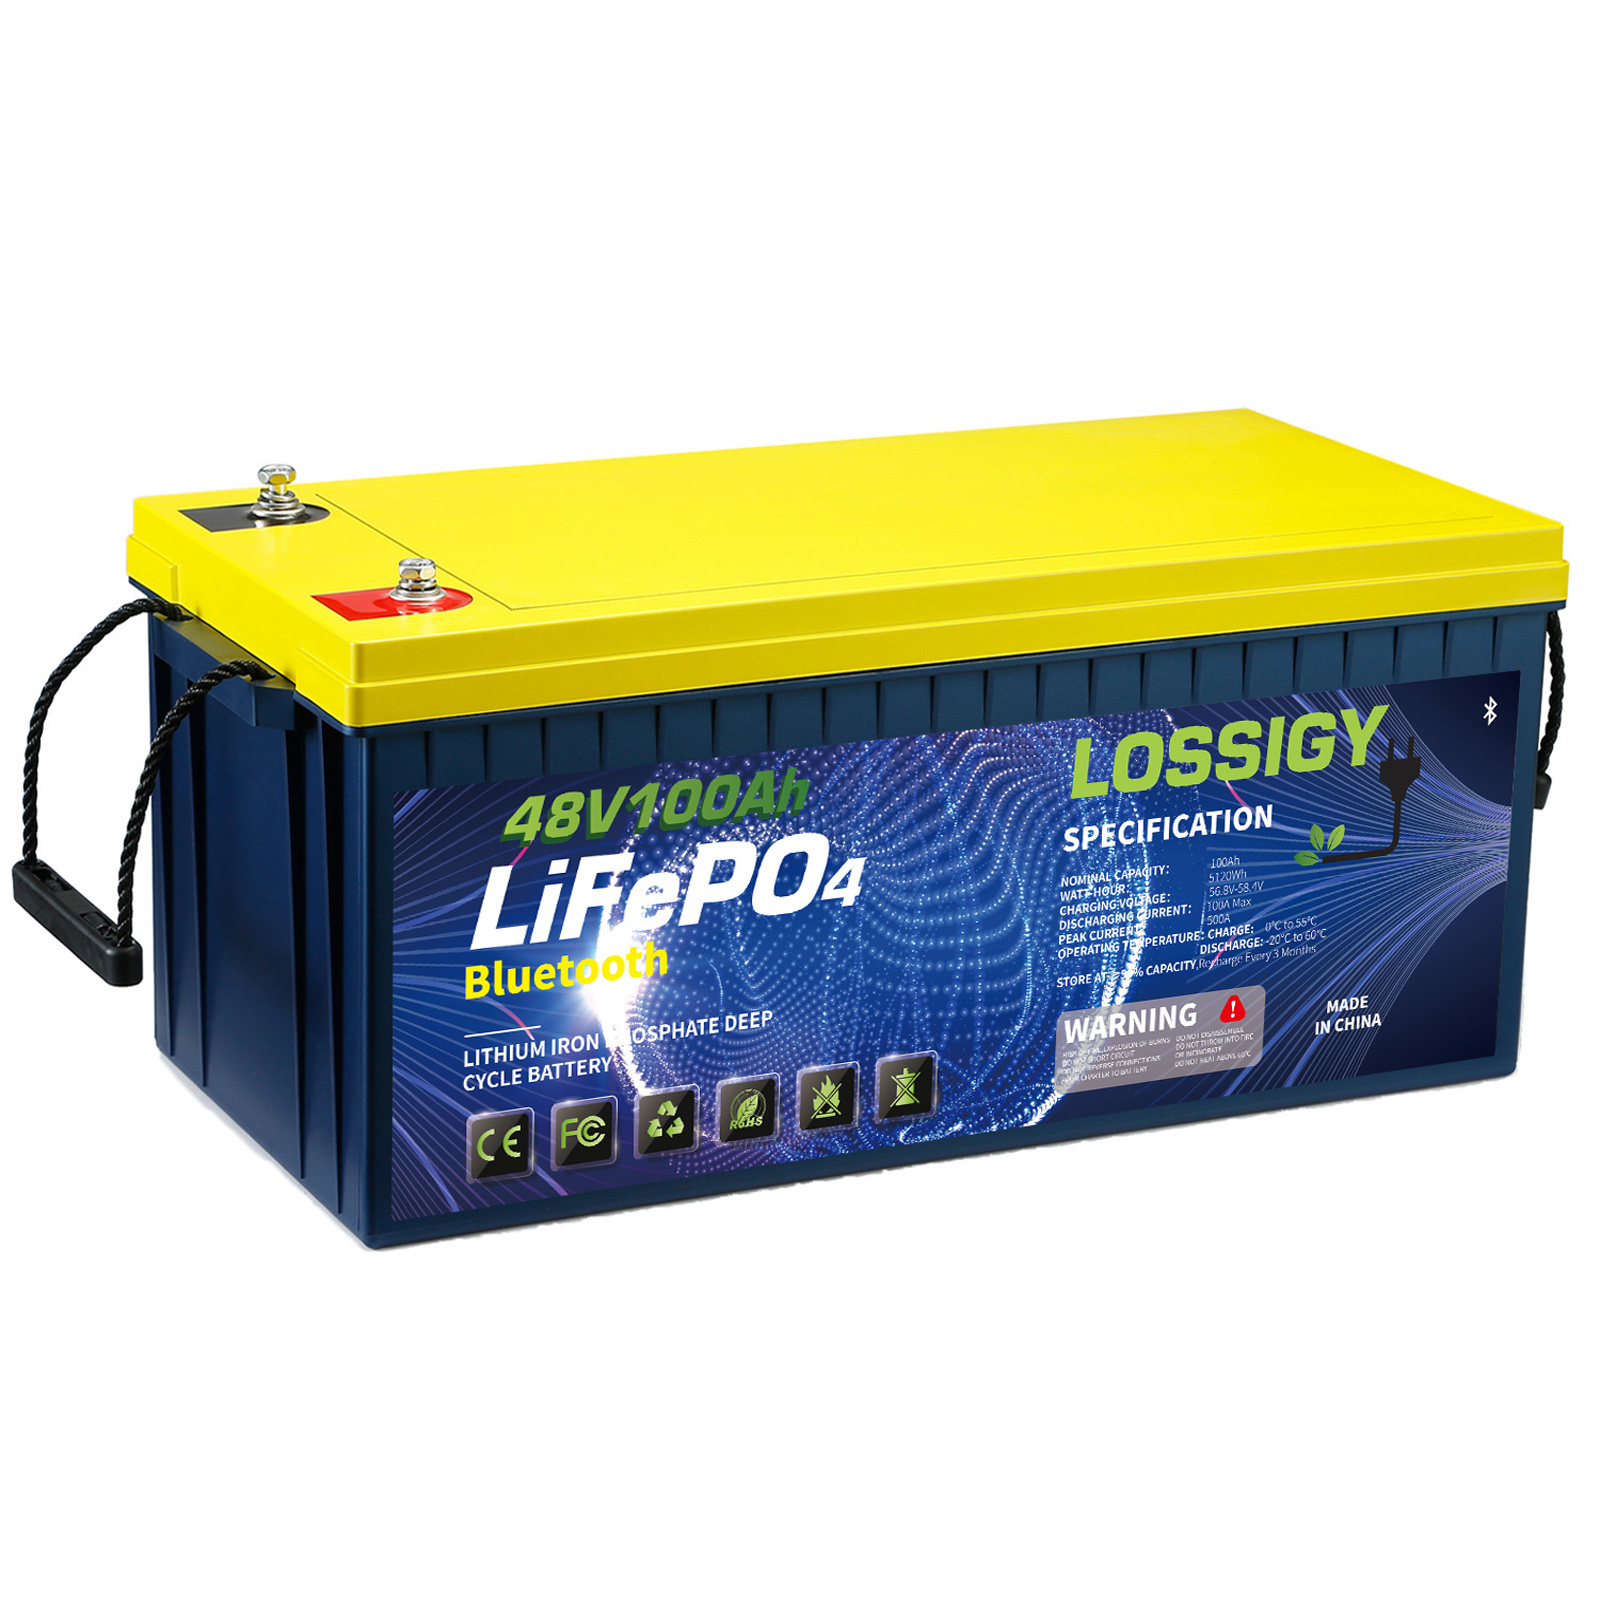 48V 100AH Lifepo4 Deep Cycle Lithium Battery with Bluetooth( Built in 100A  BMS, 5120WH), 10 Year Lifespan, Perfectly for RV, Golf Cart, Trolling  Motor, Solar System-Lossigy 丨 LifePo4 in Your Life.